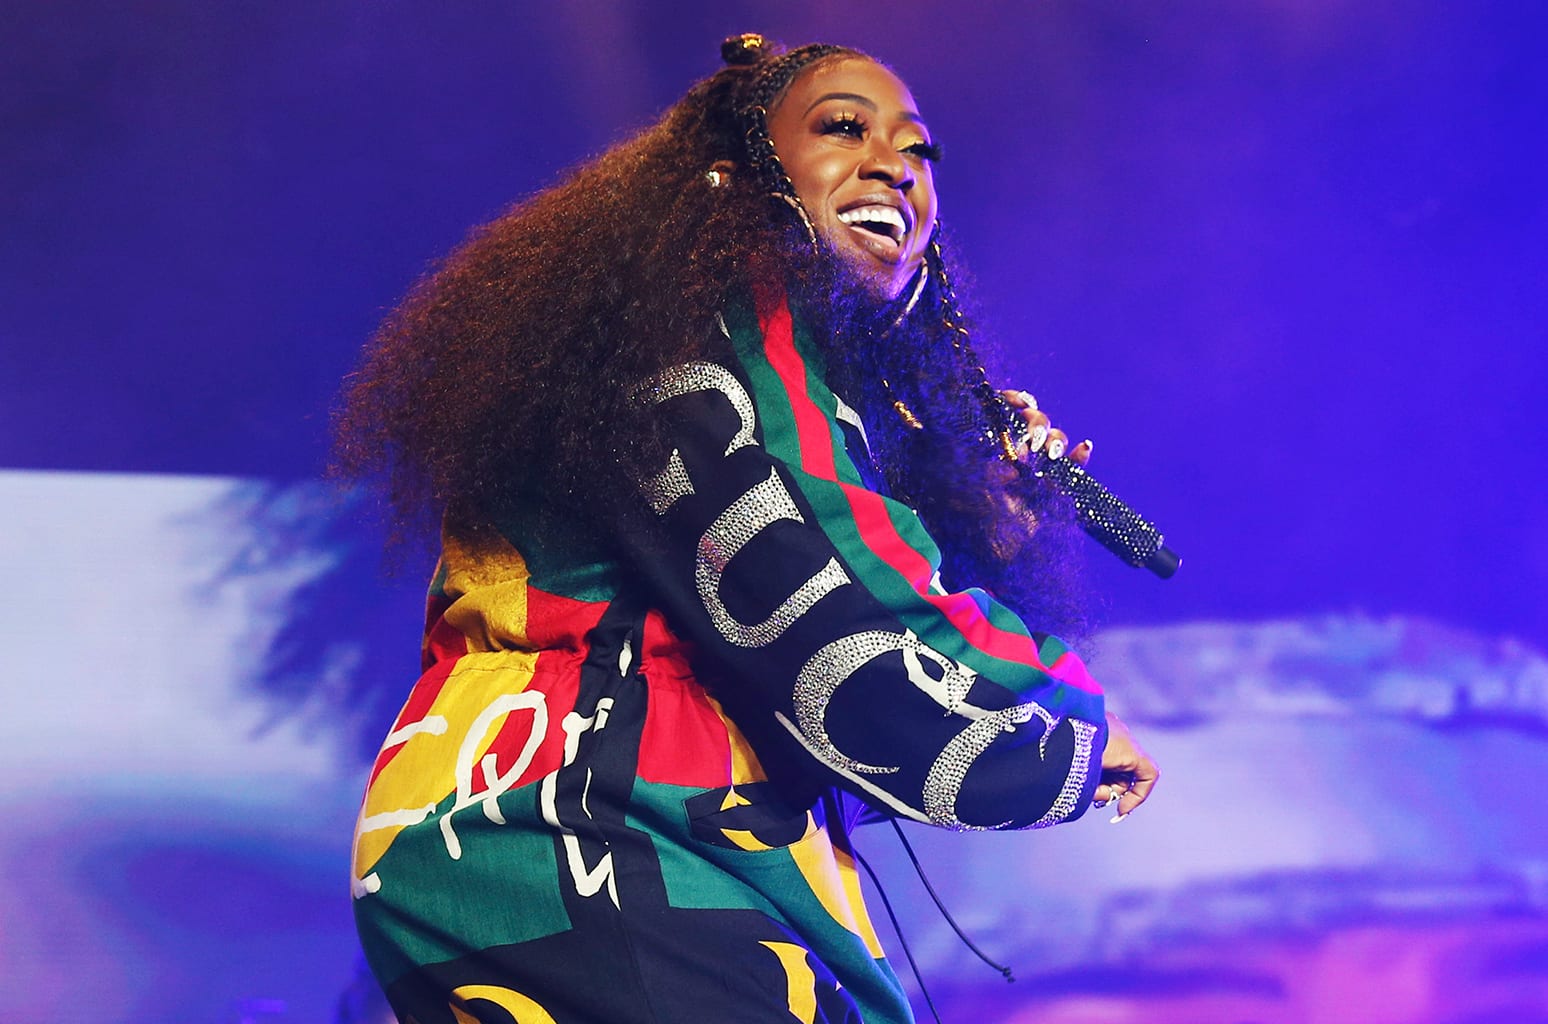 Missy Elliott Reveals She 'Used To Cry When They Clowned Me'